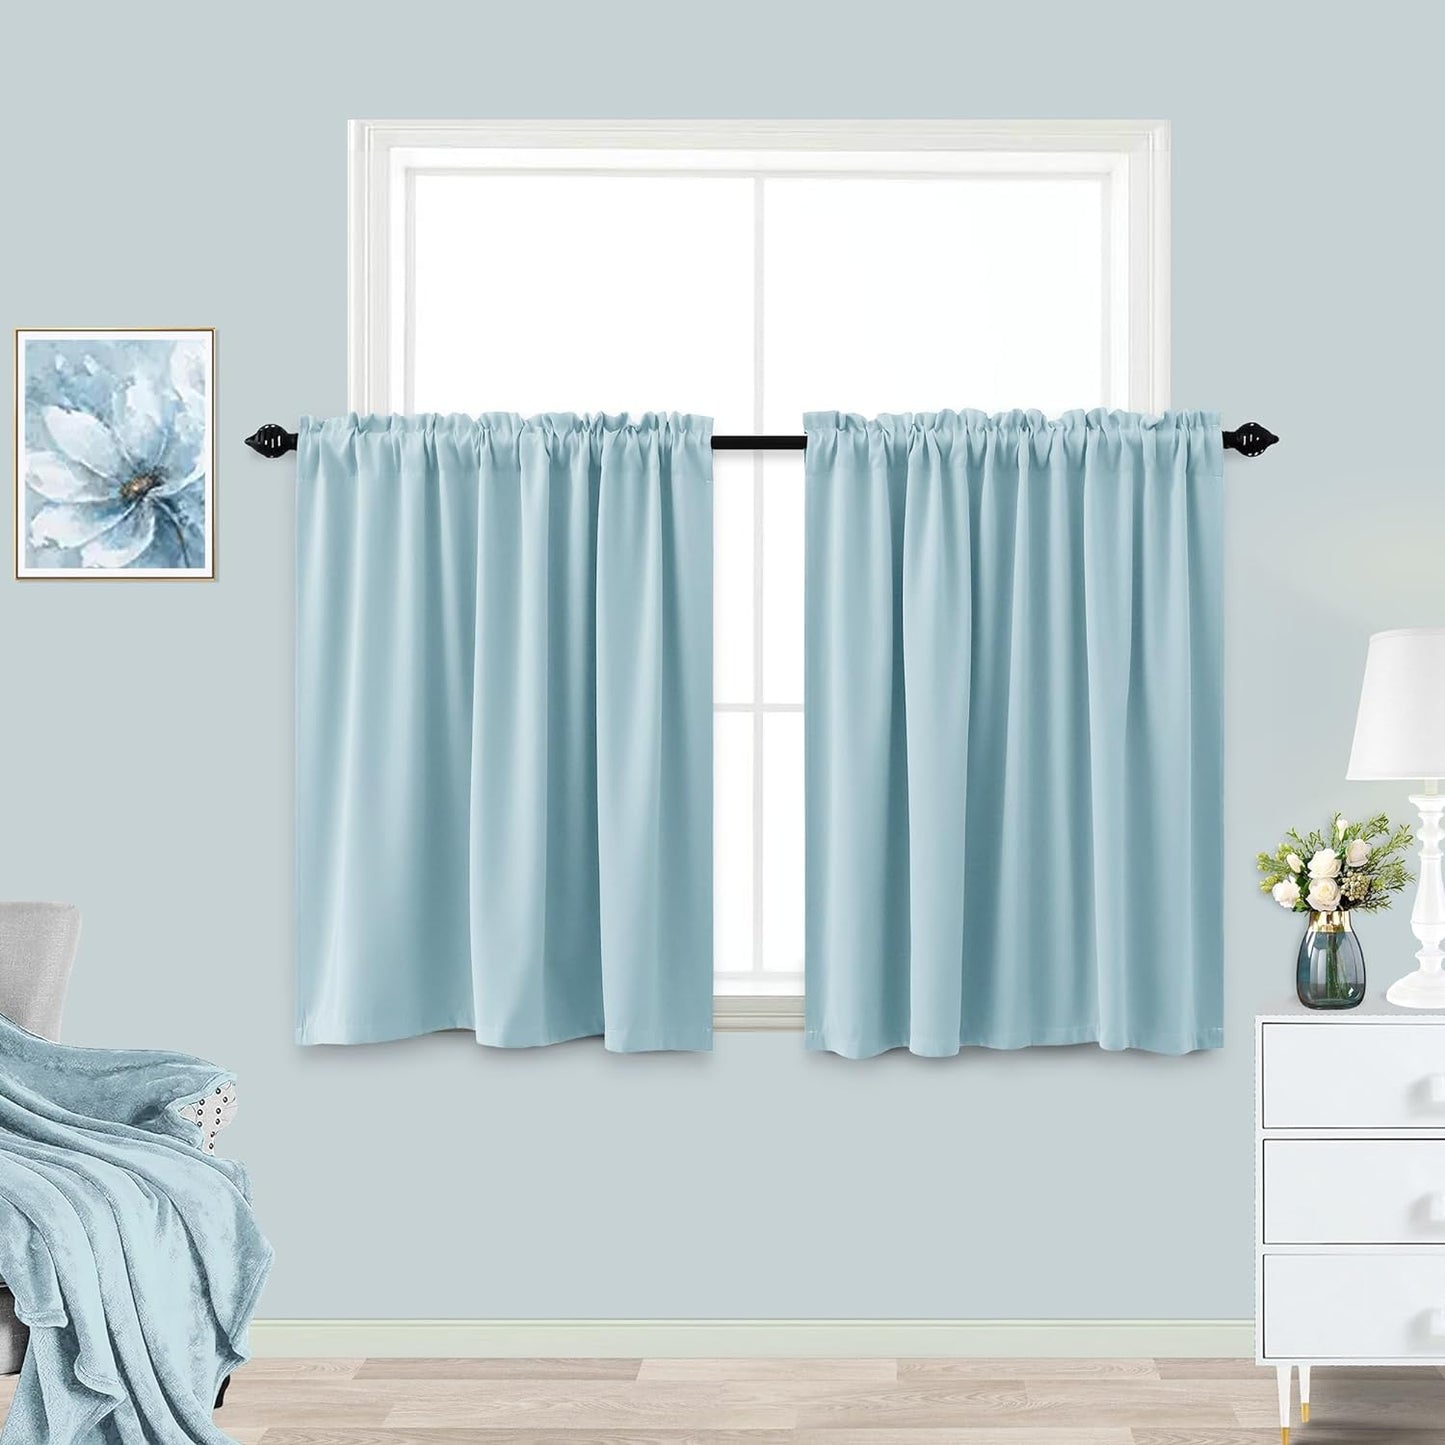 KOUFALL Sage Green Curtains 24 Inch Length for Bathroom Window 2 Pack Rod Pocket Room Darkening Cafe Curtain Tiers Blackout Light Green Short Curtains for Small Windows 34 by 24 in Long  KOUFALL TEXTILE Light Blue 34X30 